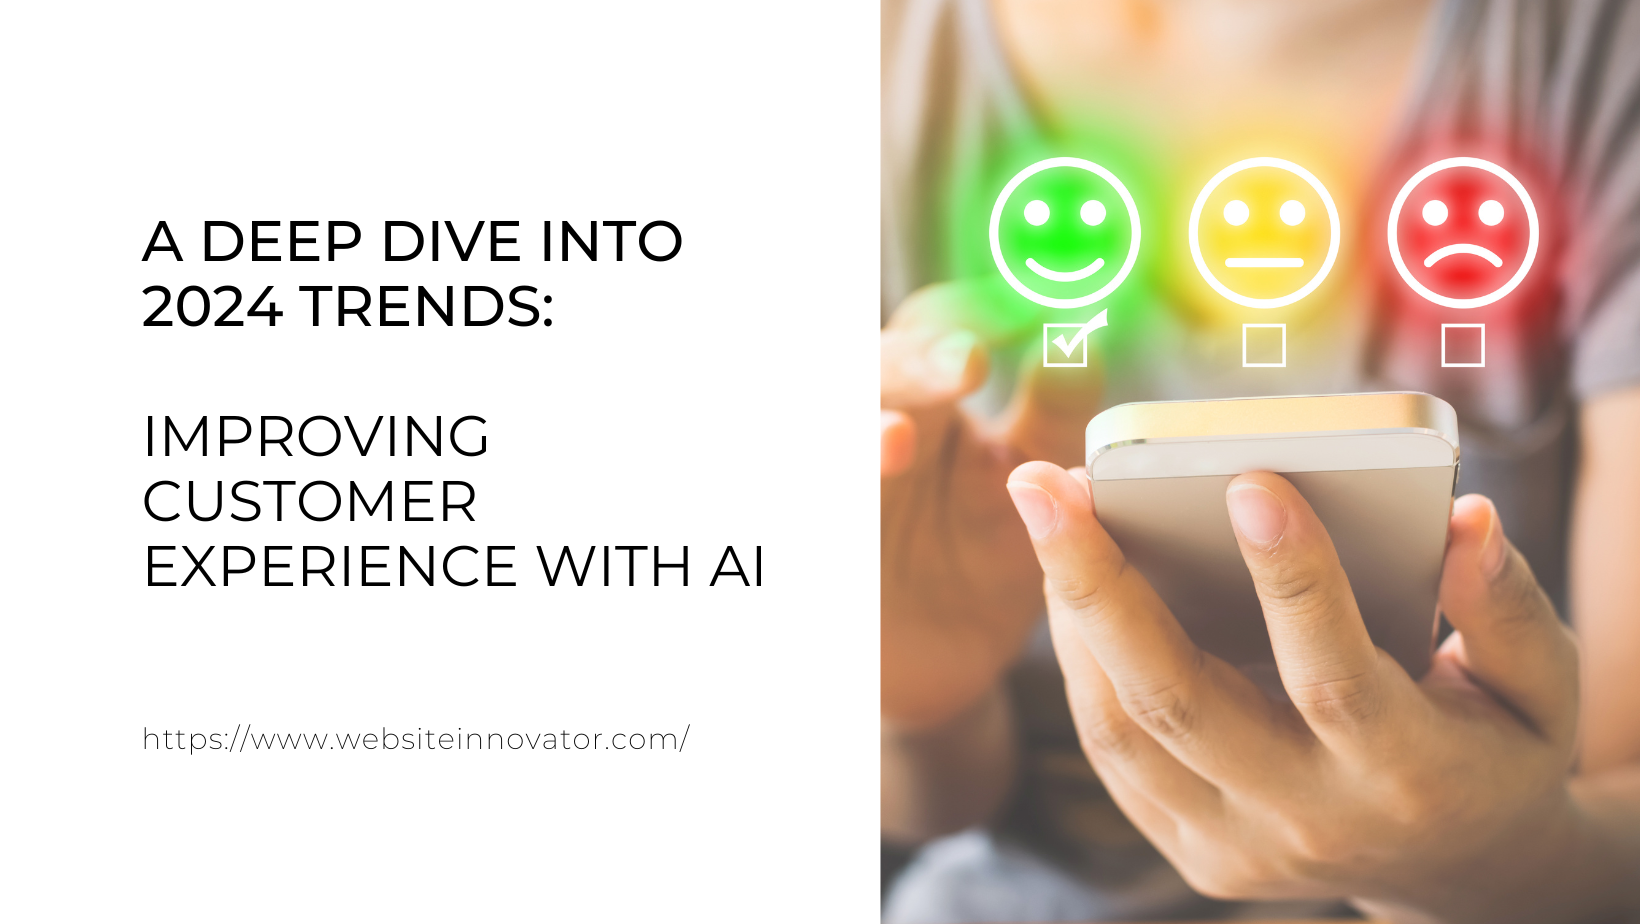 A Deep Dive into 2024 Trends: Improving customer experience with AI